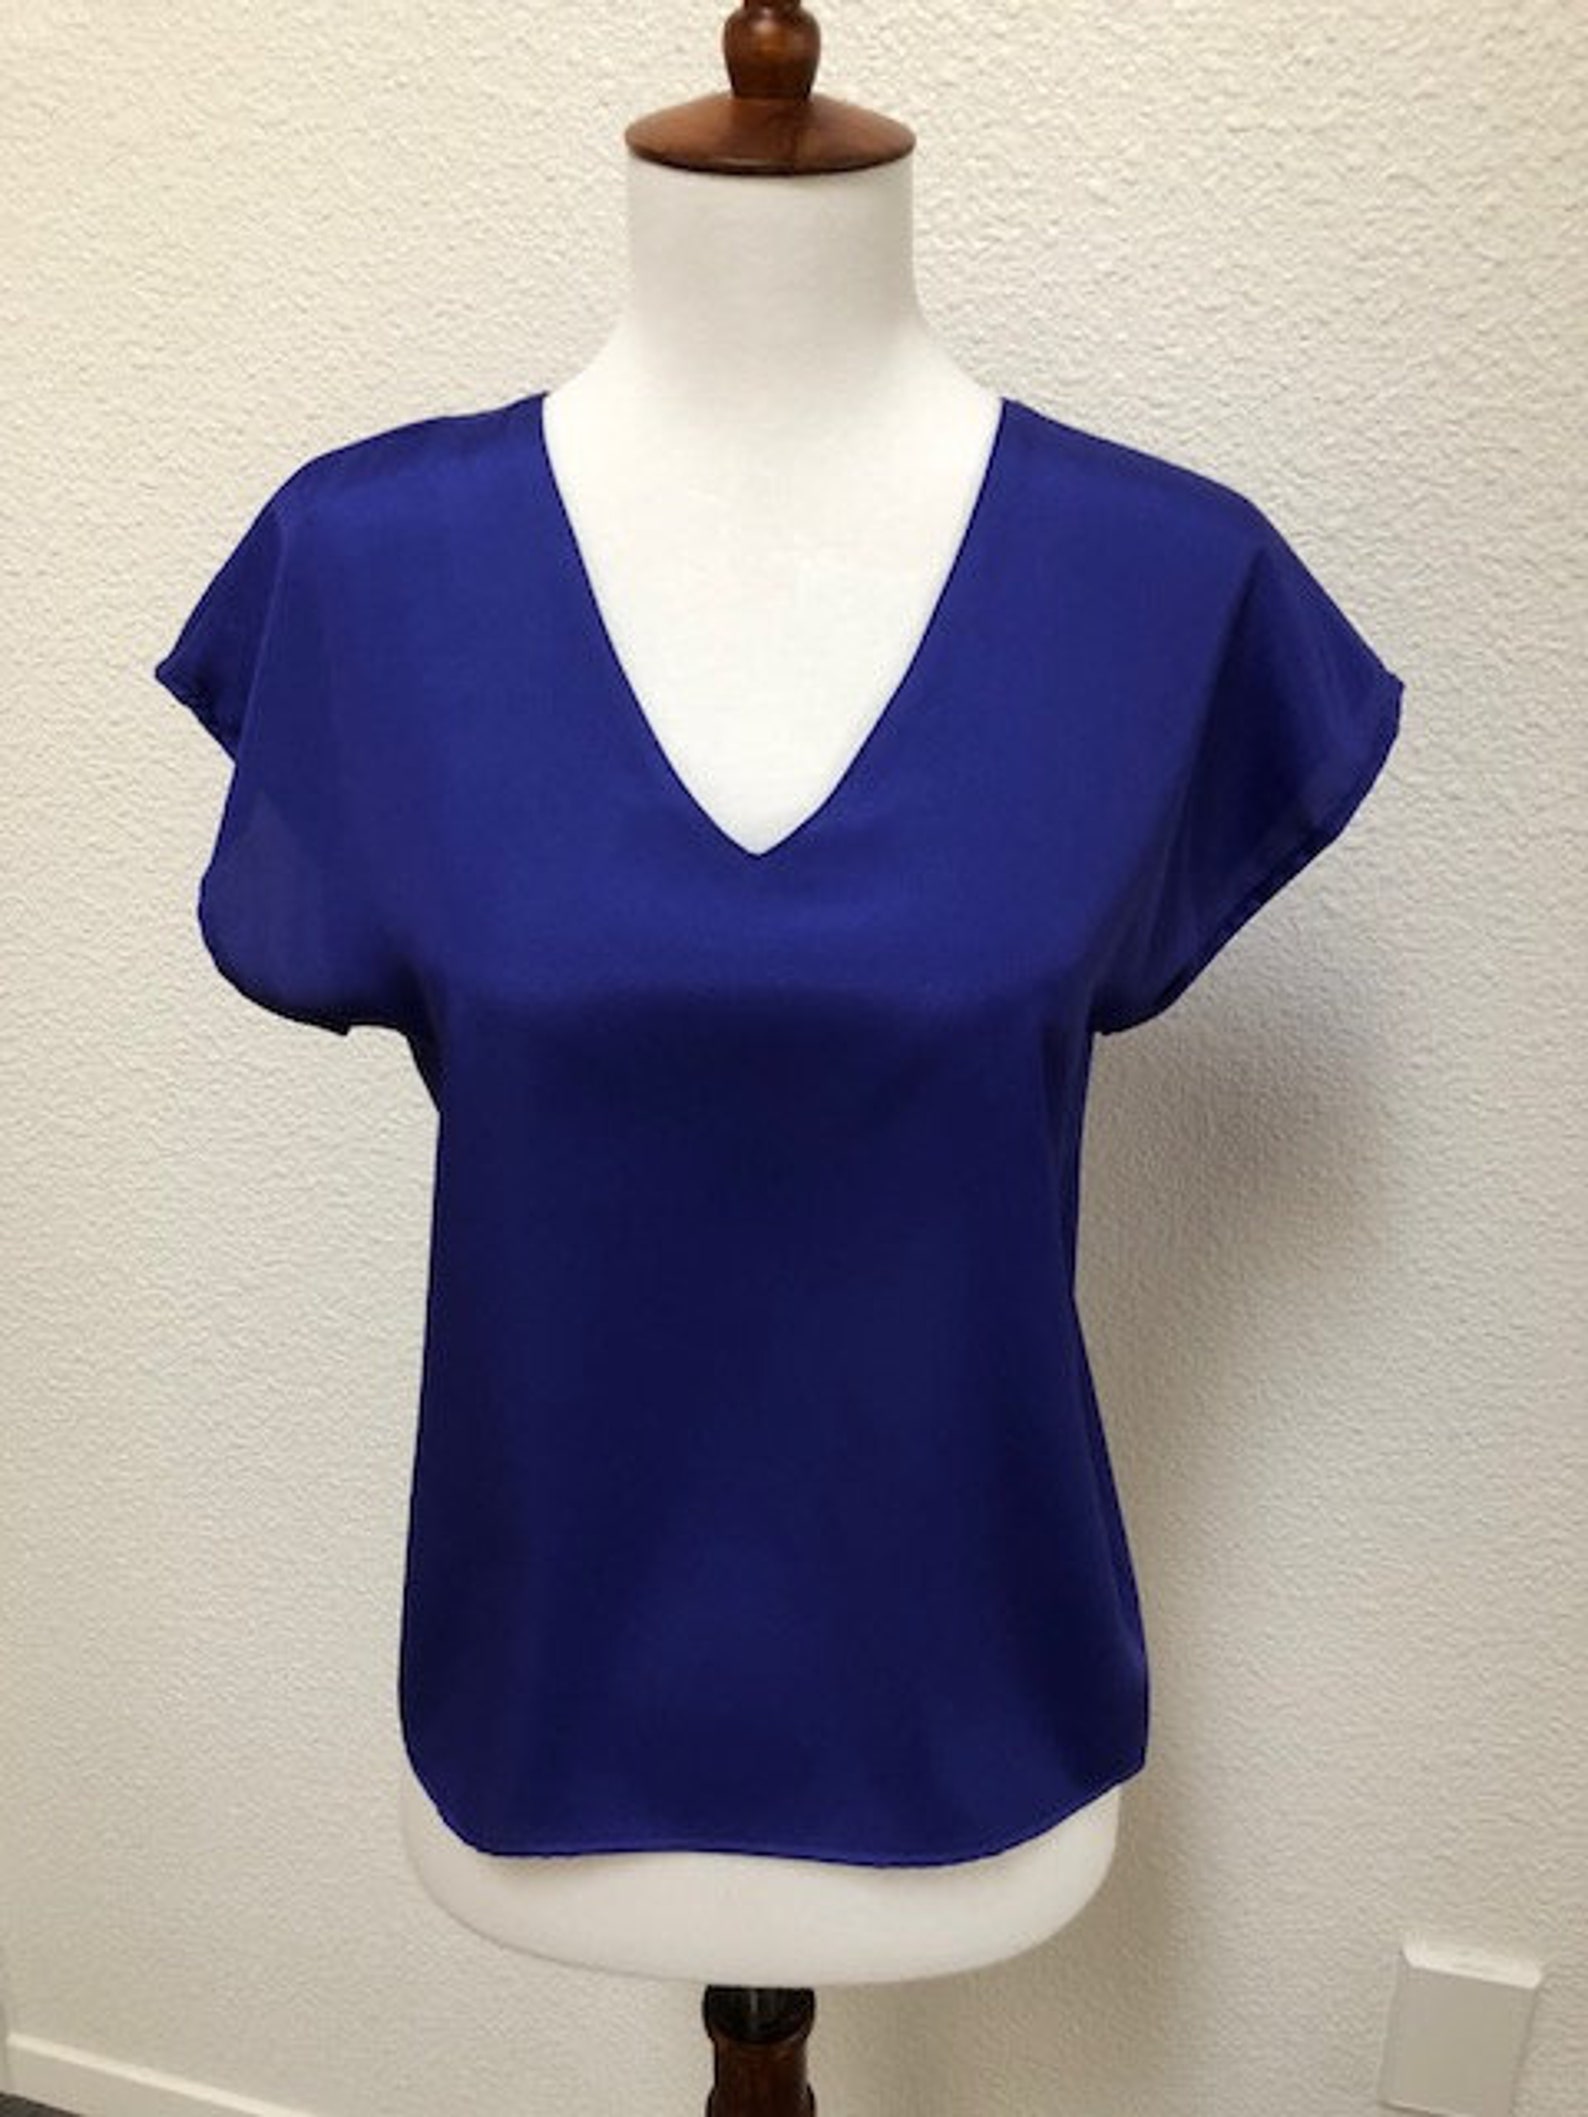 Size S Bright Blue Blouse by First Glance - Etsy